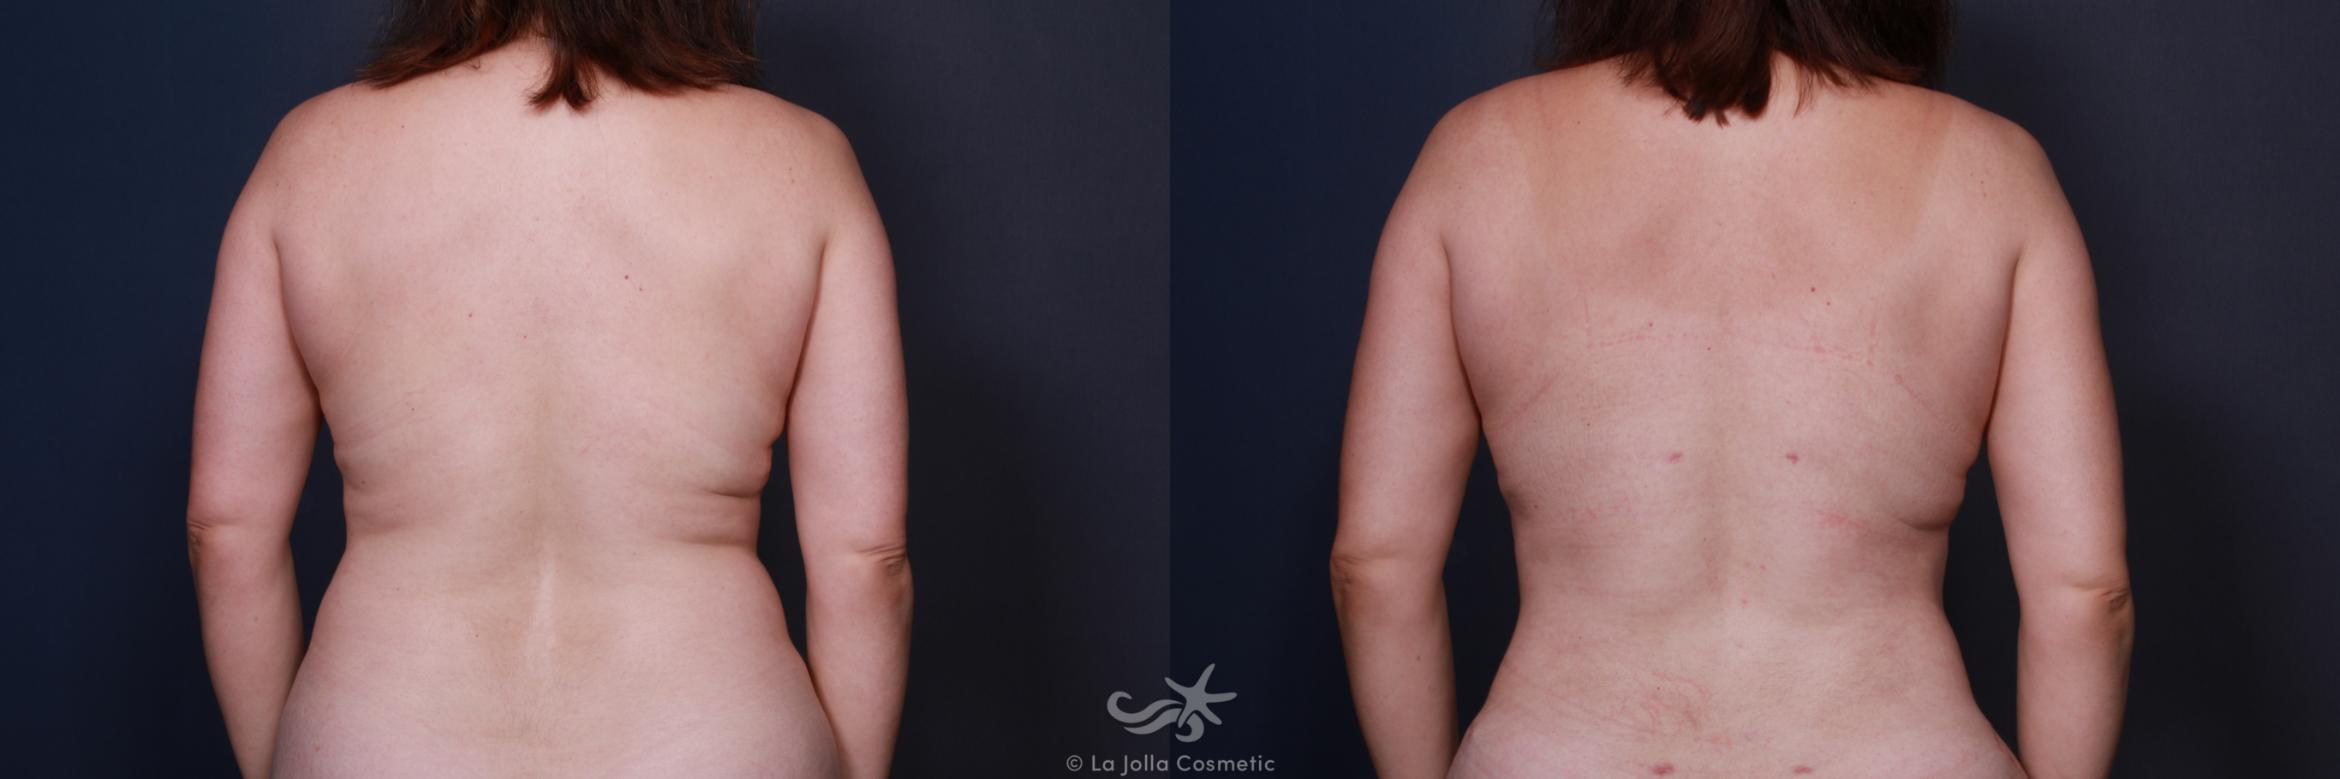 Before & After Tummy Tuck Result 579 Back View in San Diego, CA